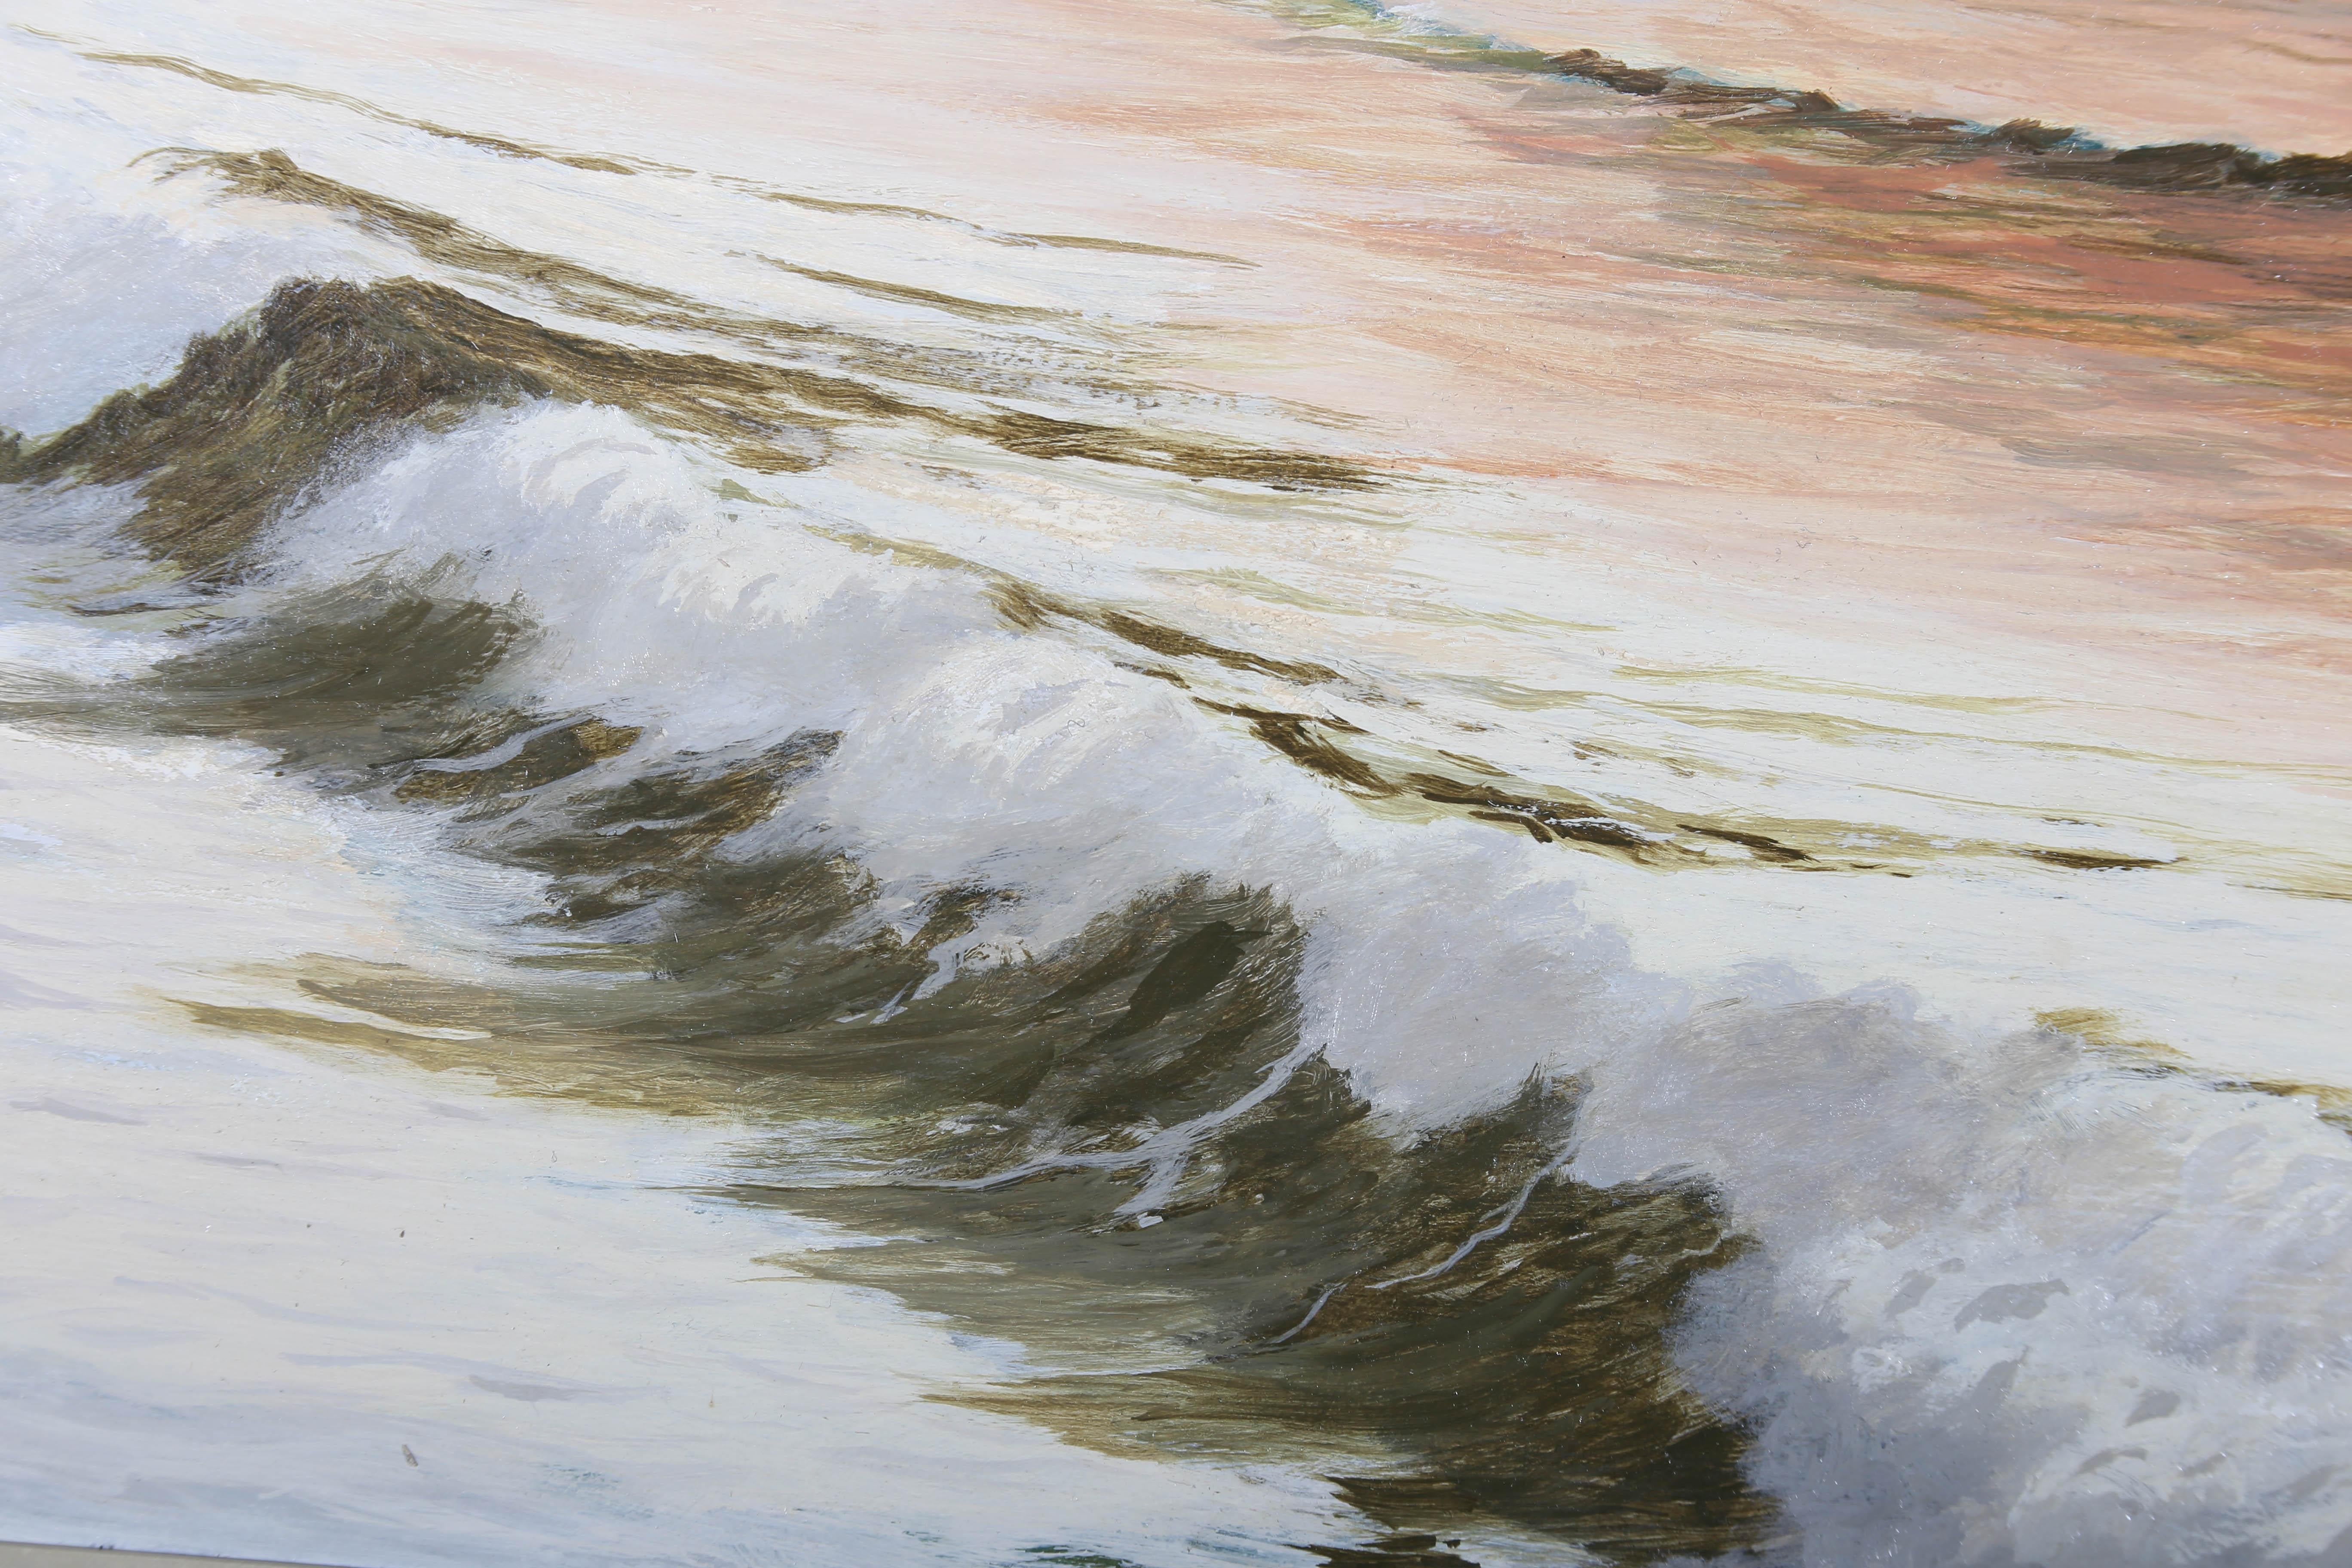 A beautiful coastal seascape with dramatic white tipped waves crashing on imposing cliffs. The waves have a beautiful opaque green at the shore line that fades into blush pink as the sun sets on the water in the distance. The artist has signed to